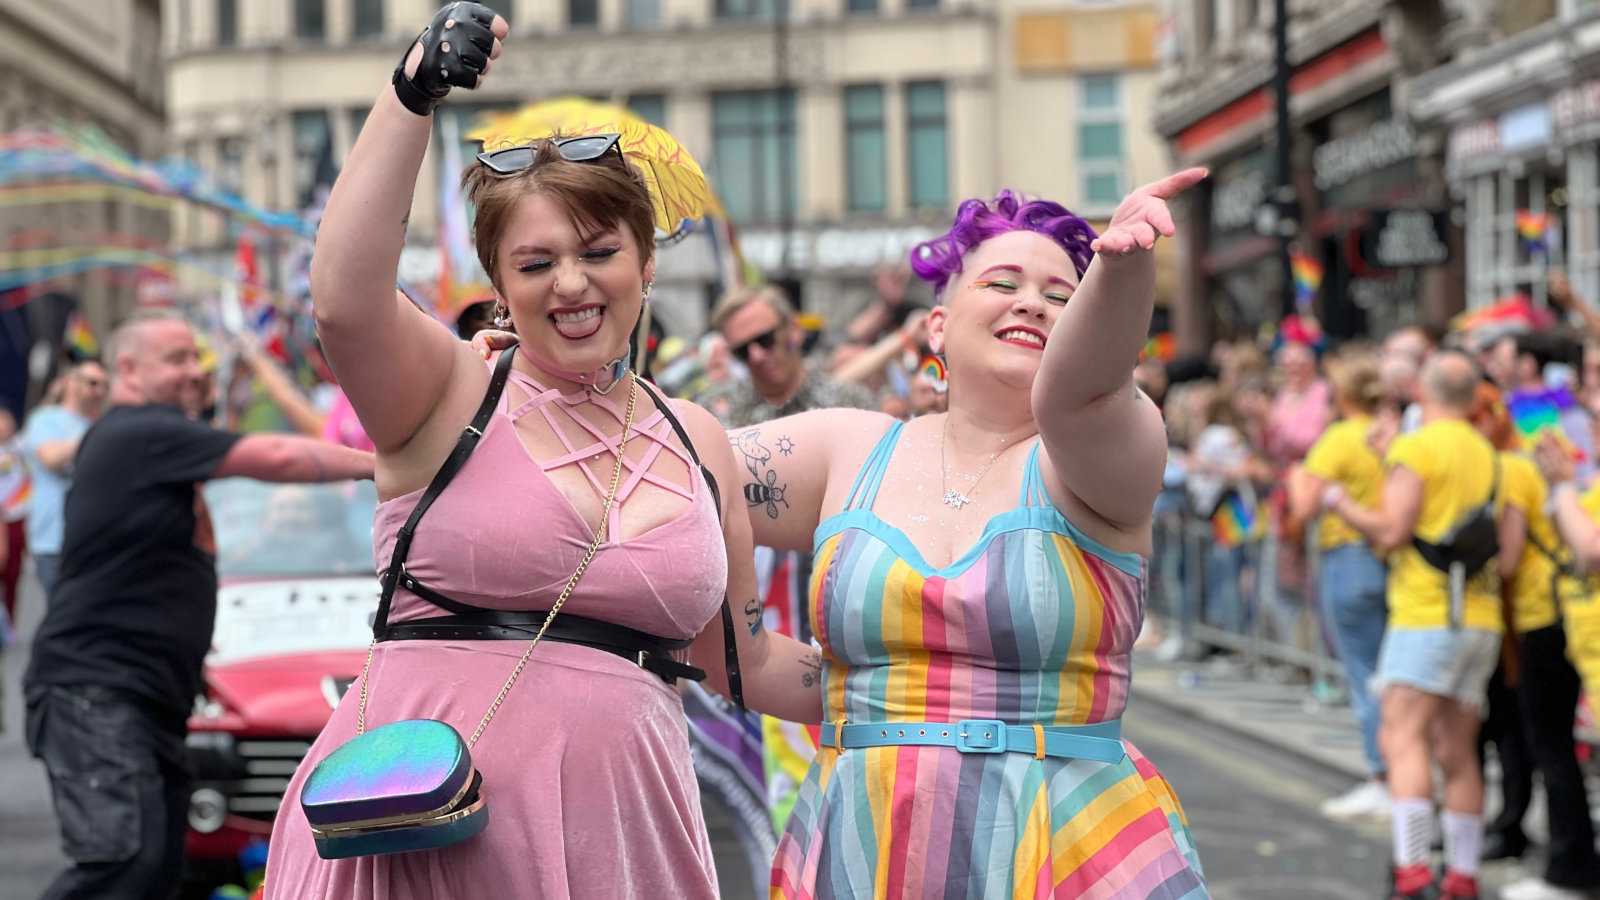 Cute lesbian couple marching at London Pride.